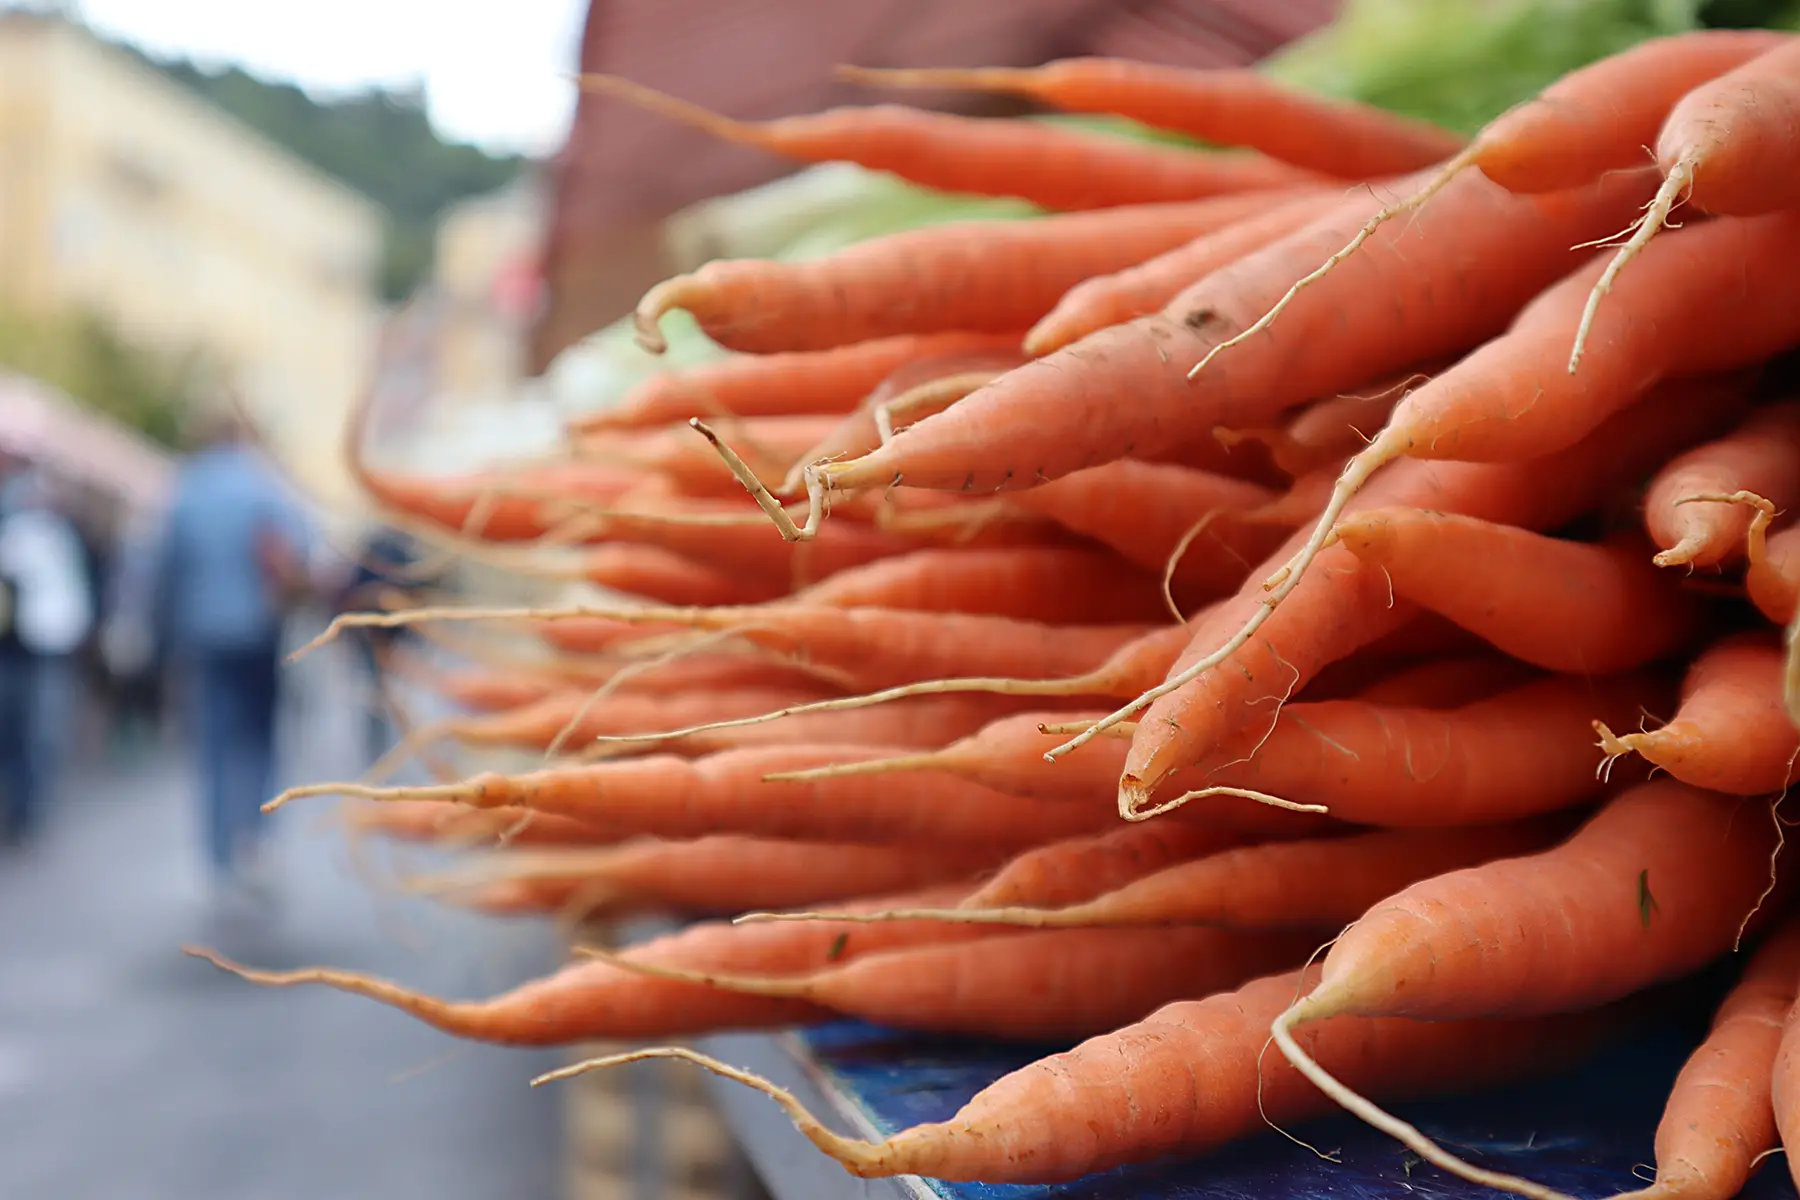 Carrots at a market stall